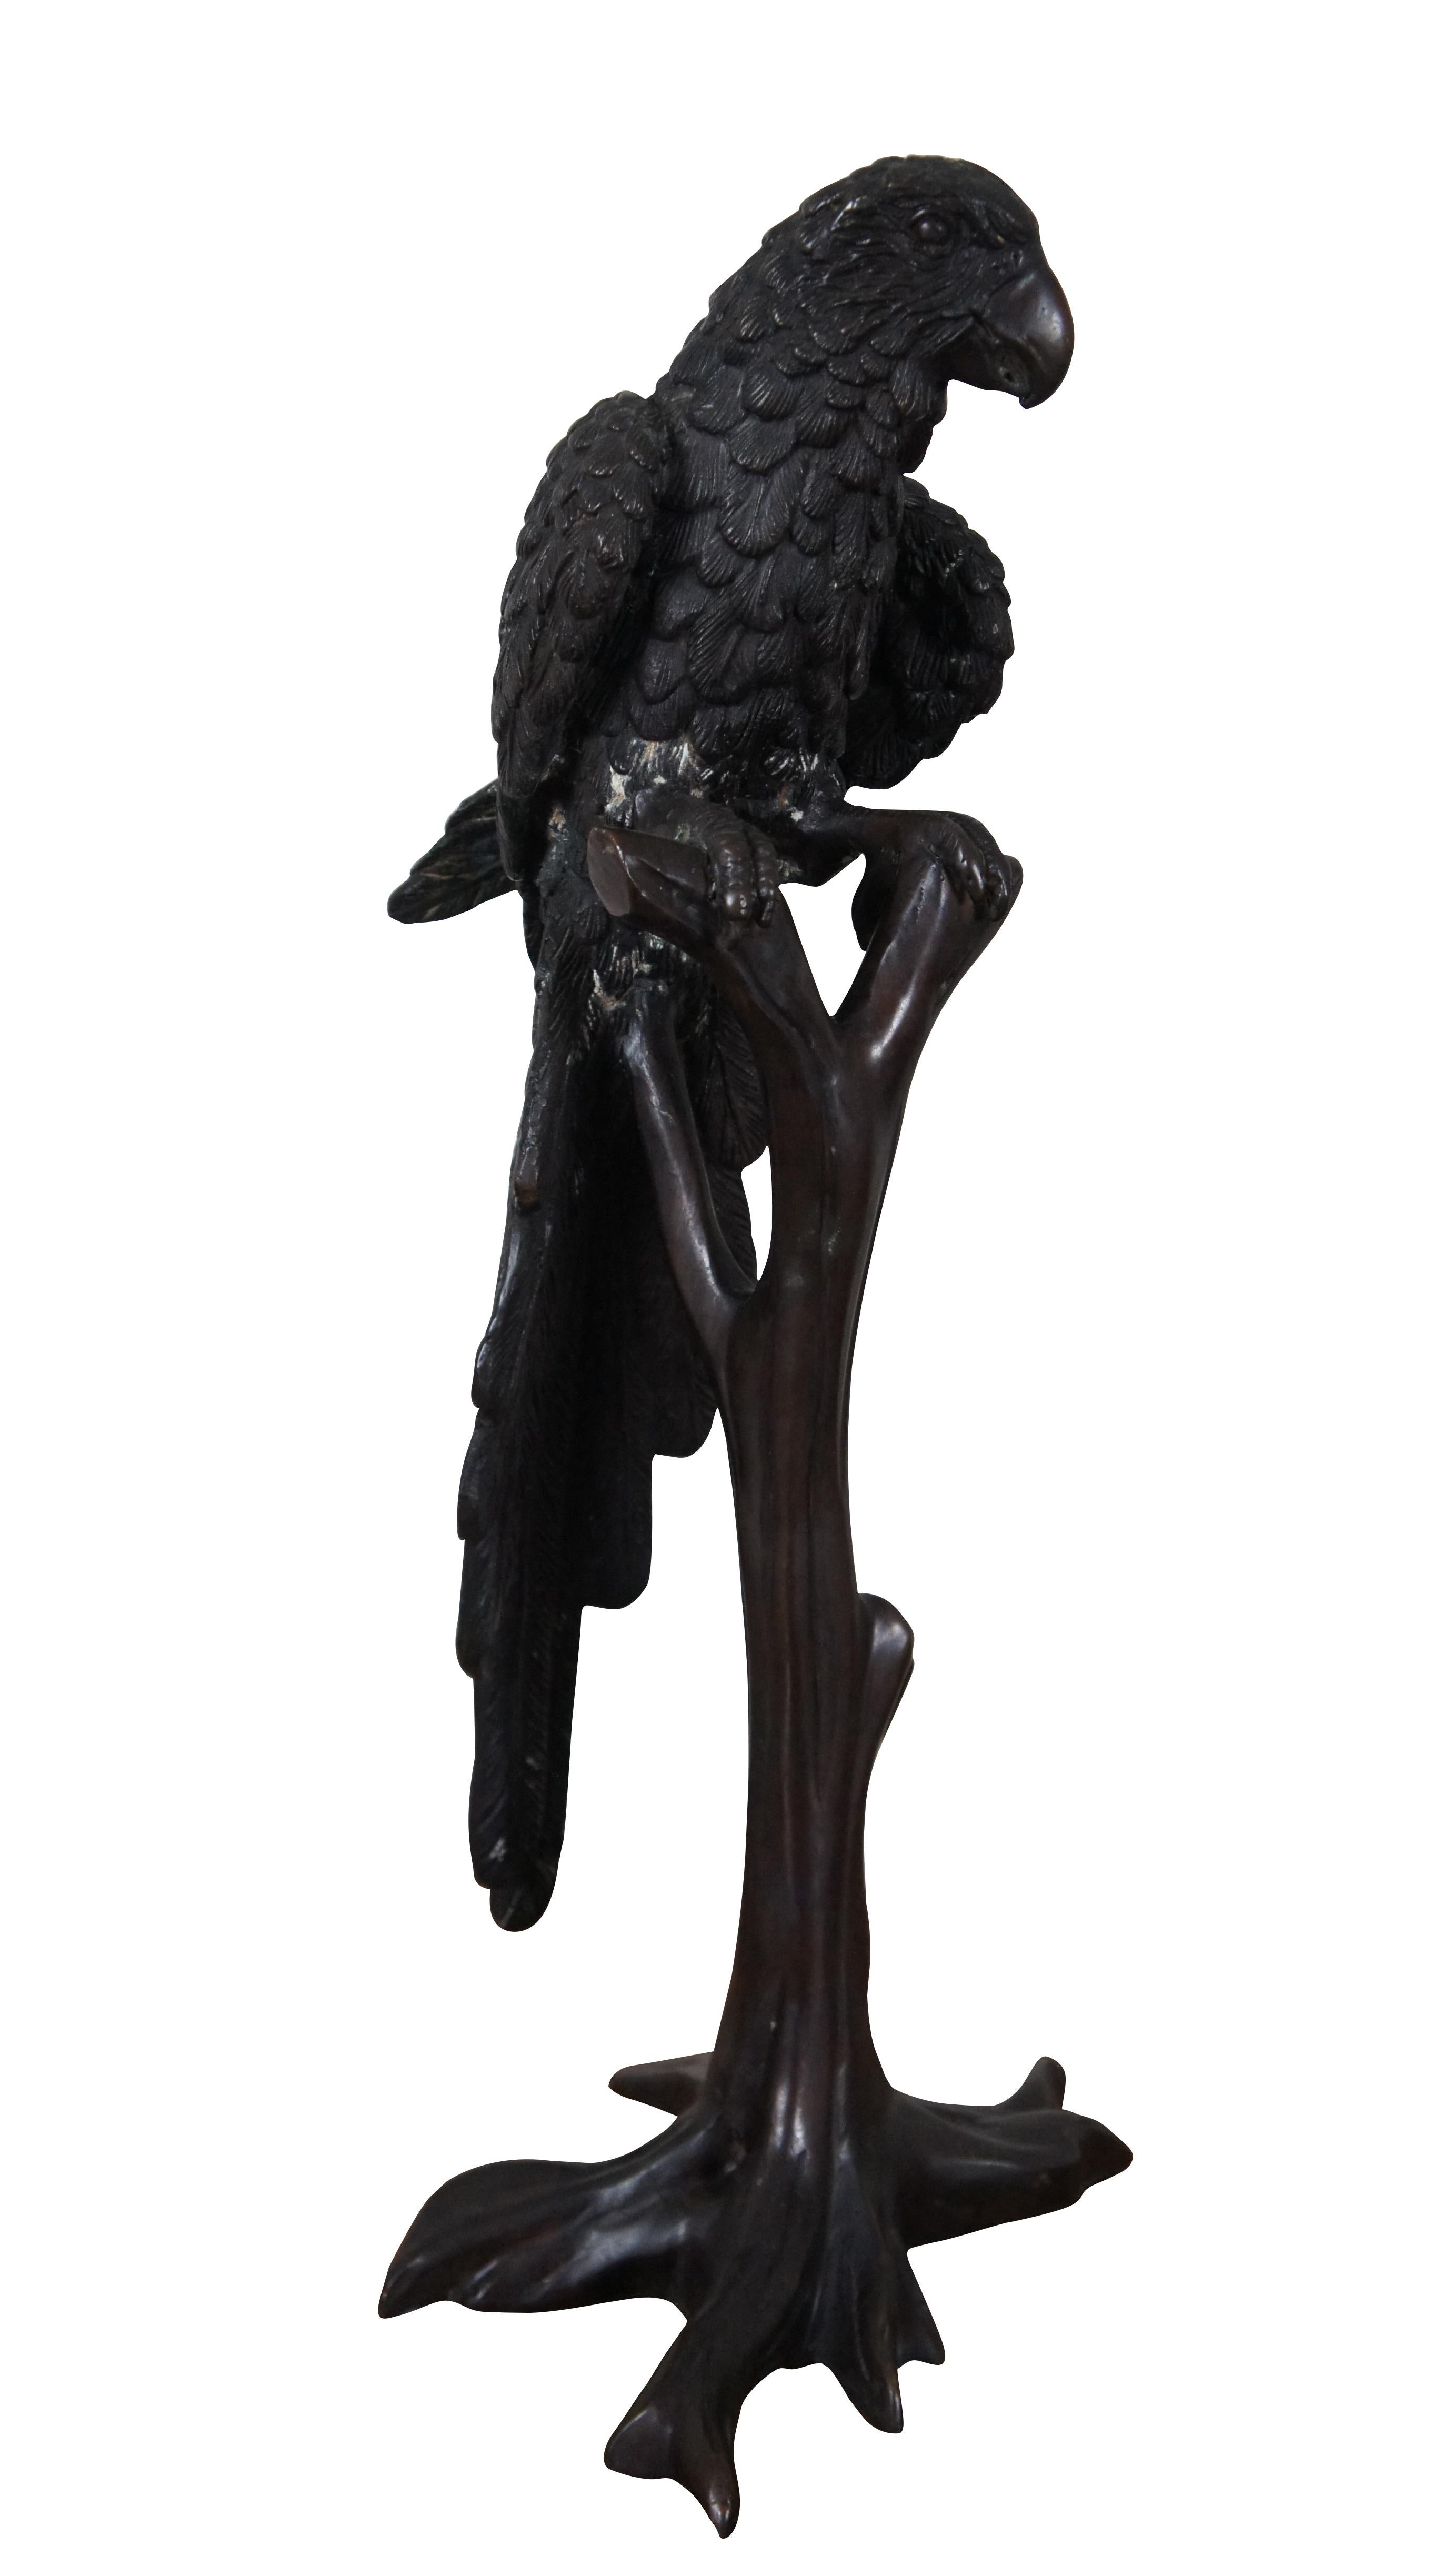 Mid century pair of French bronze Macaw Parrots / birds perched on stands with nice patina, signed Kulang.  The parrots are shown with impressive life like design to the feathers, beaks and eyes, each with a unique expression and